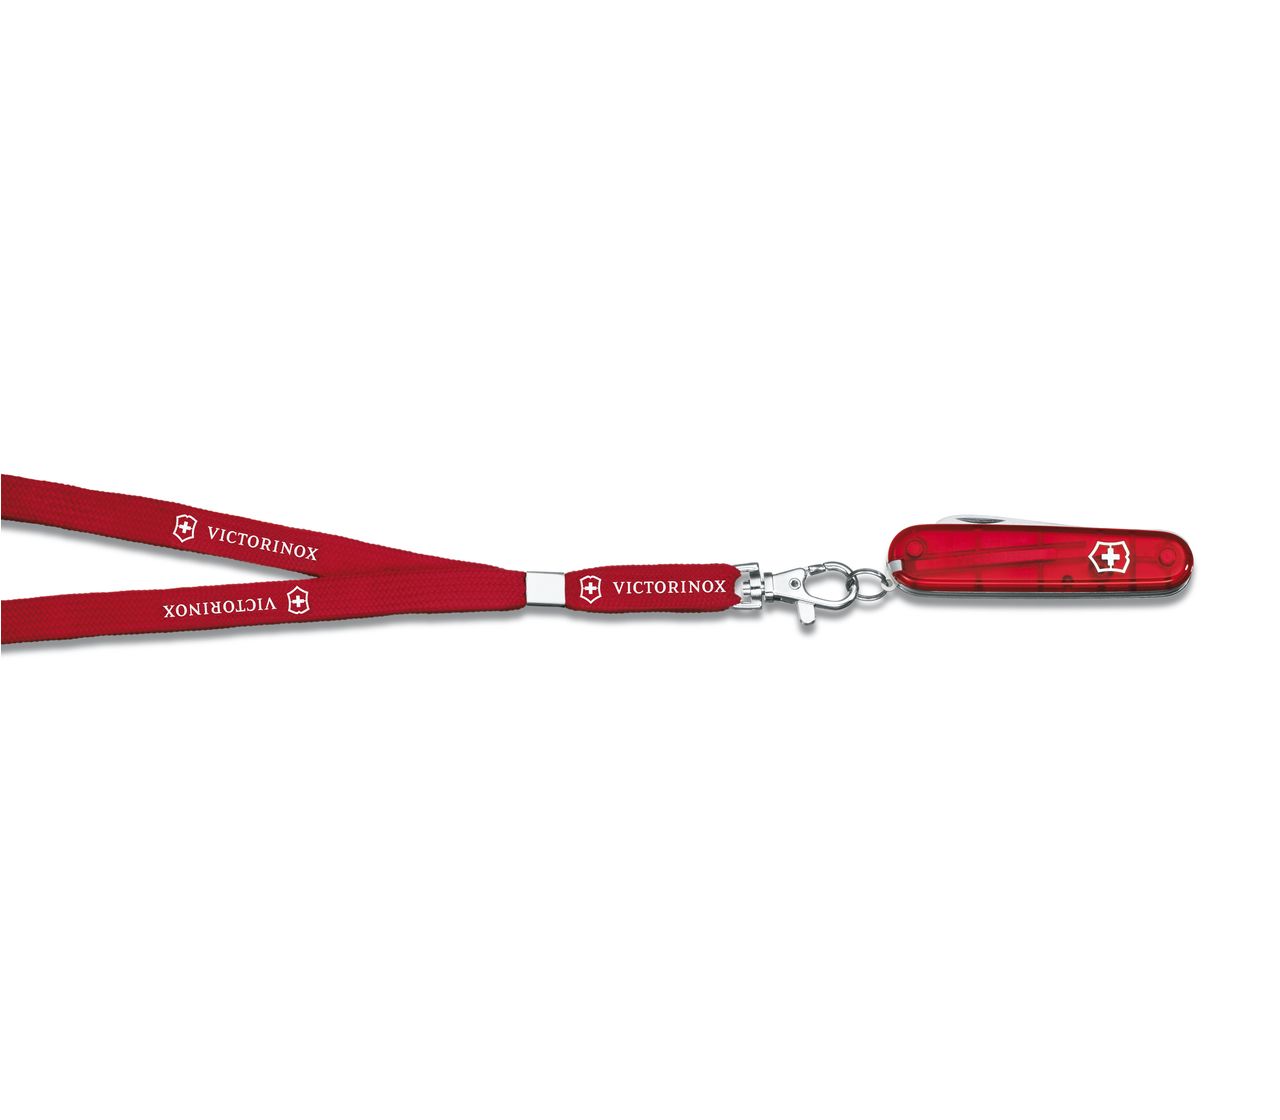 Couteau My First Victorinox avec scie